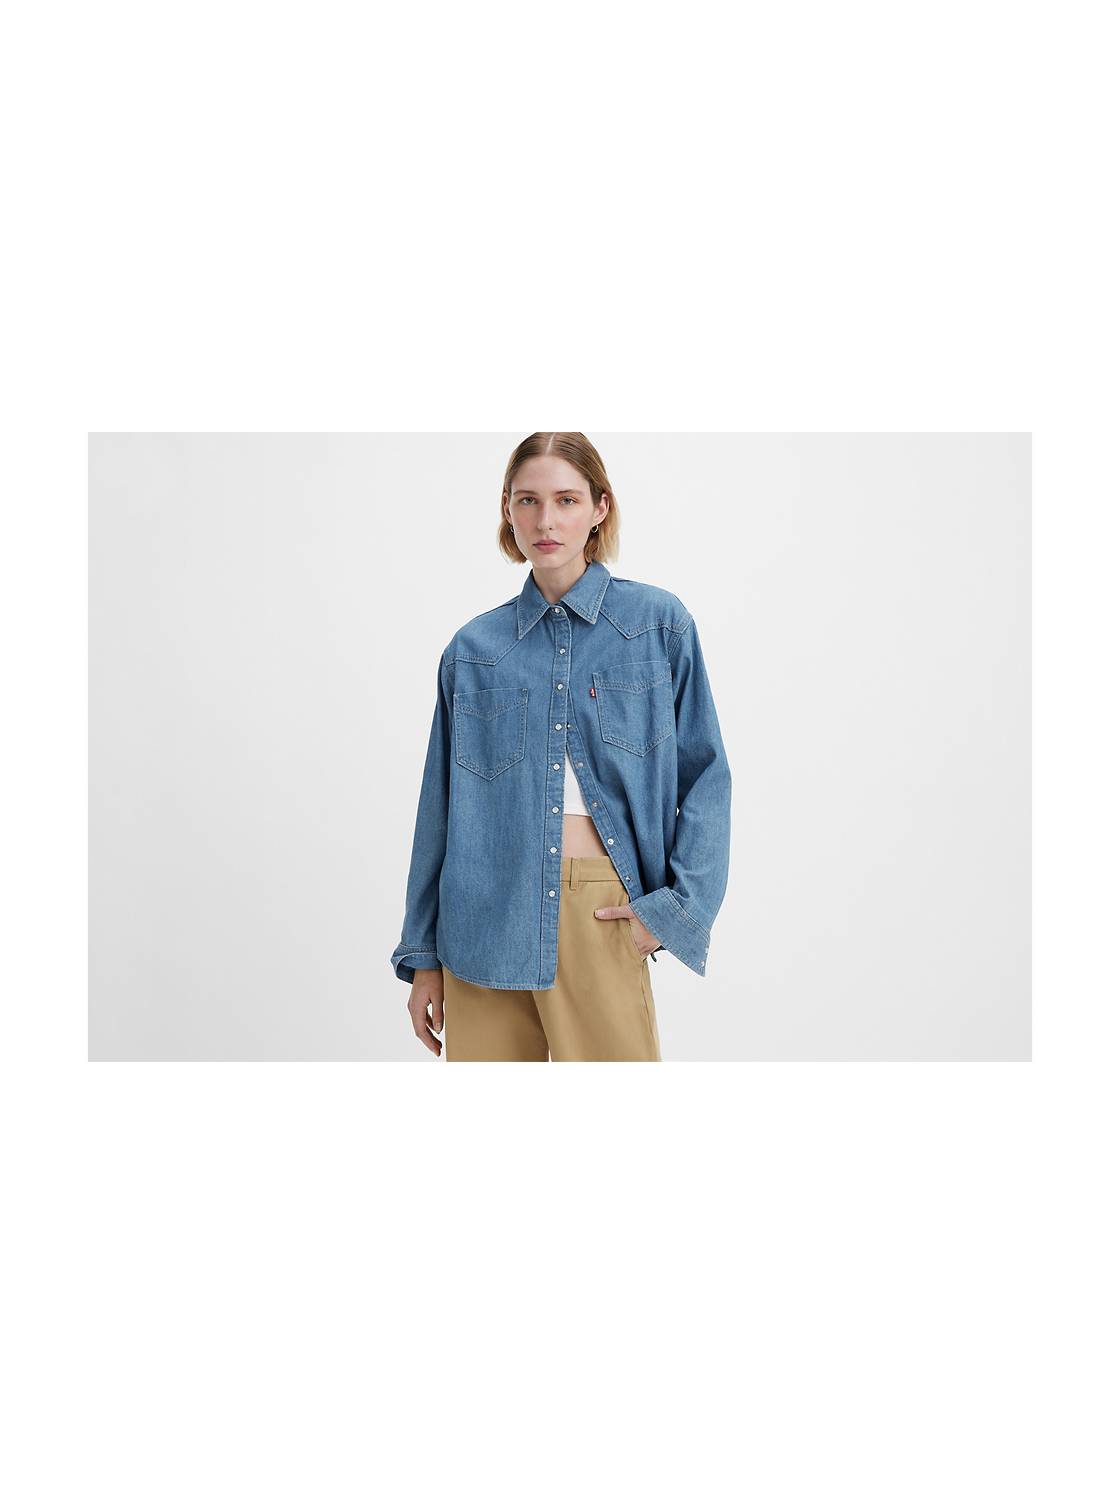 CTRLZS Womens Clothes Women Short Sleeve Denim Shirt Button Down Chambray  Jean Western Shirts Summer Loose Casual Solid Collared Tops  Blouse(Blue,Small) at  Women's Clothing store